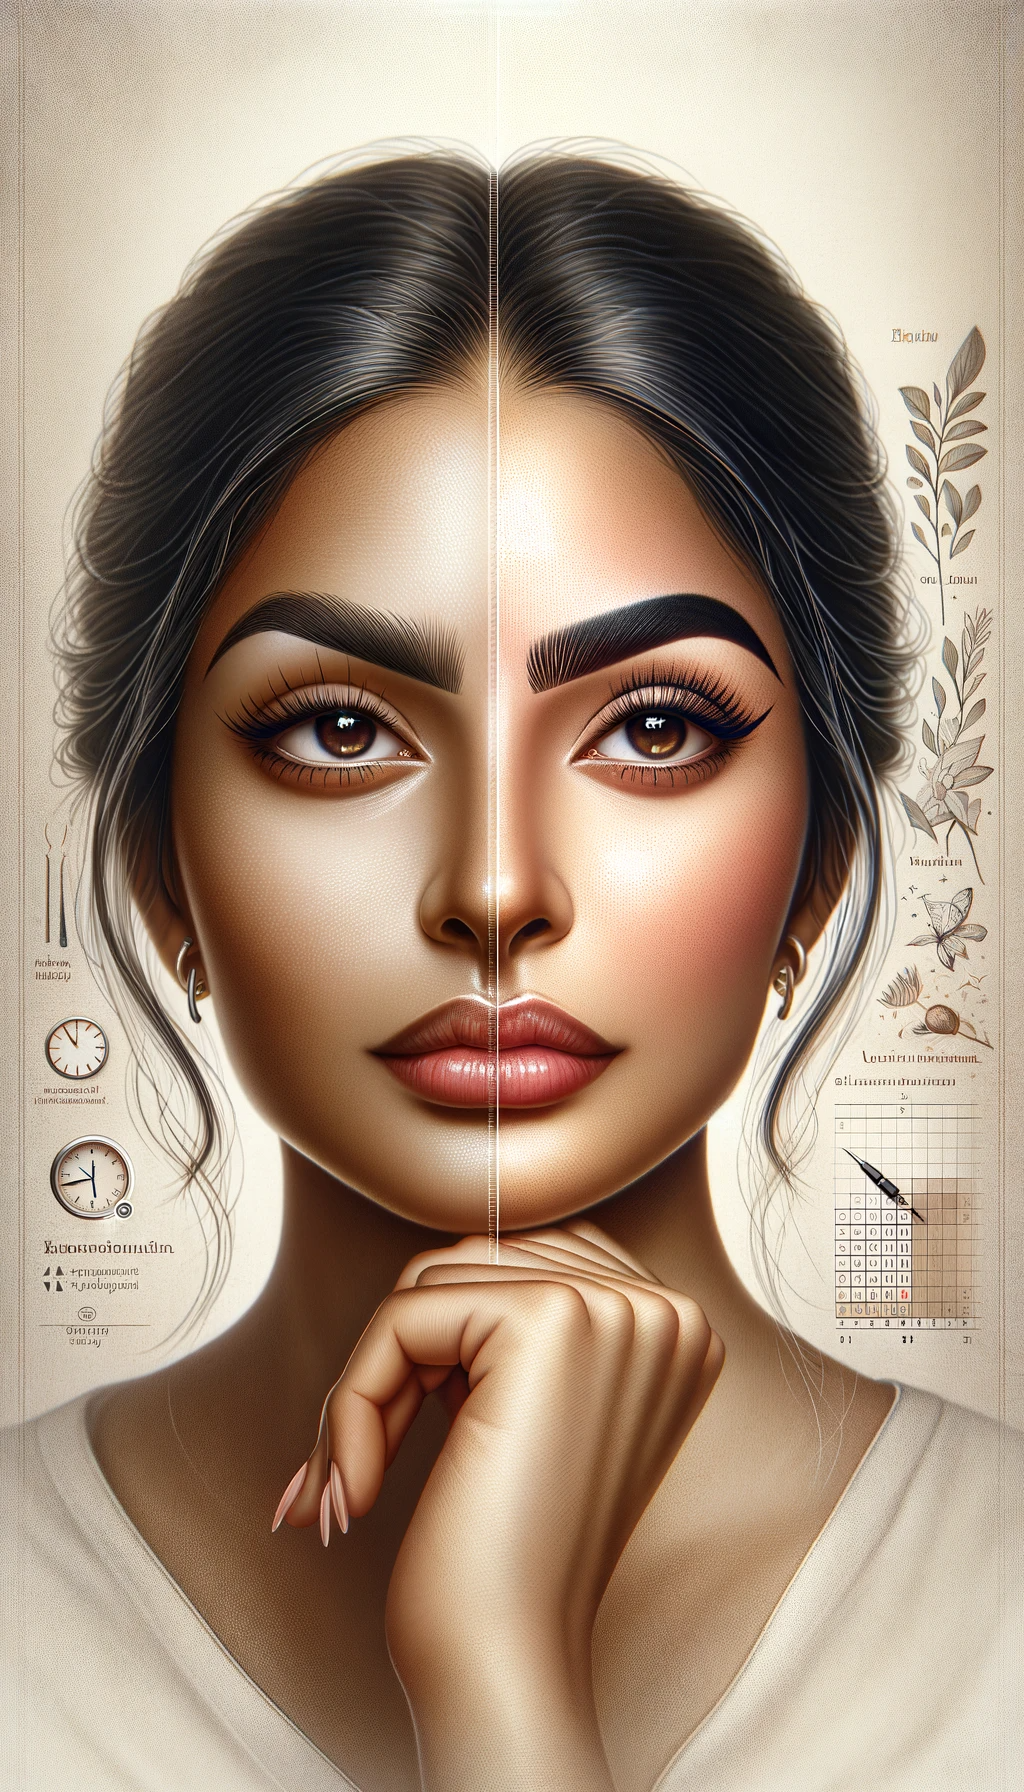 A single detailed portrait representing Microblading Permanence What to Know Before Committing to Beautiful Brows. The image features a woman Sou